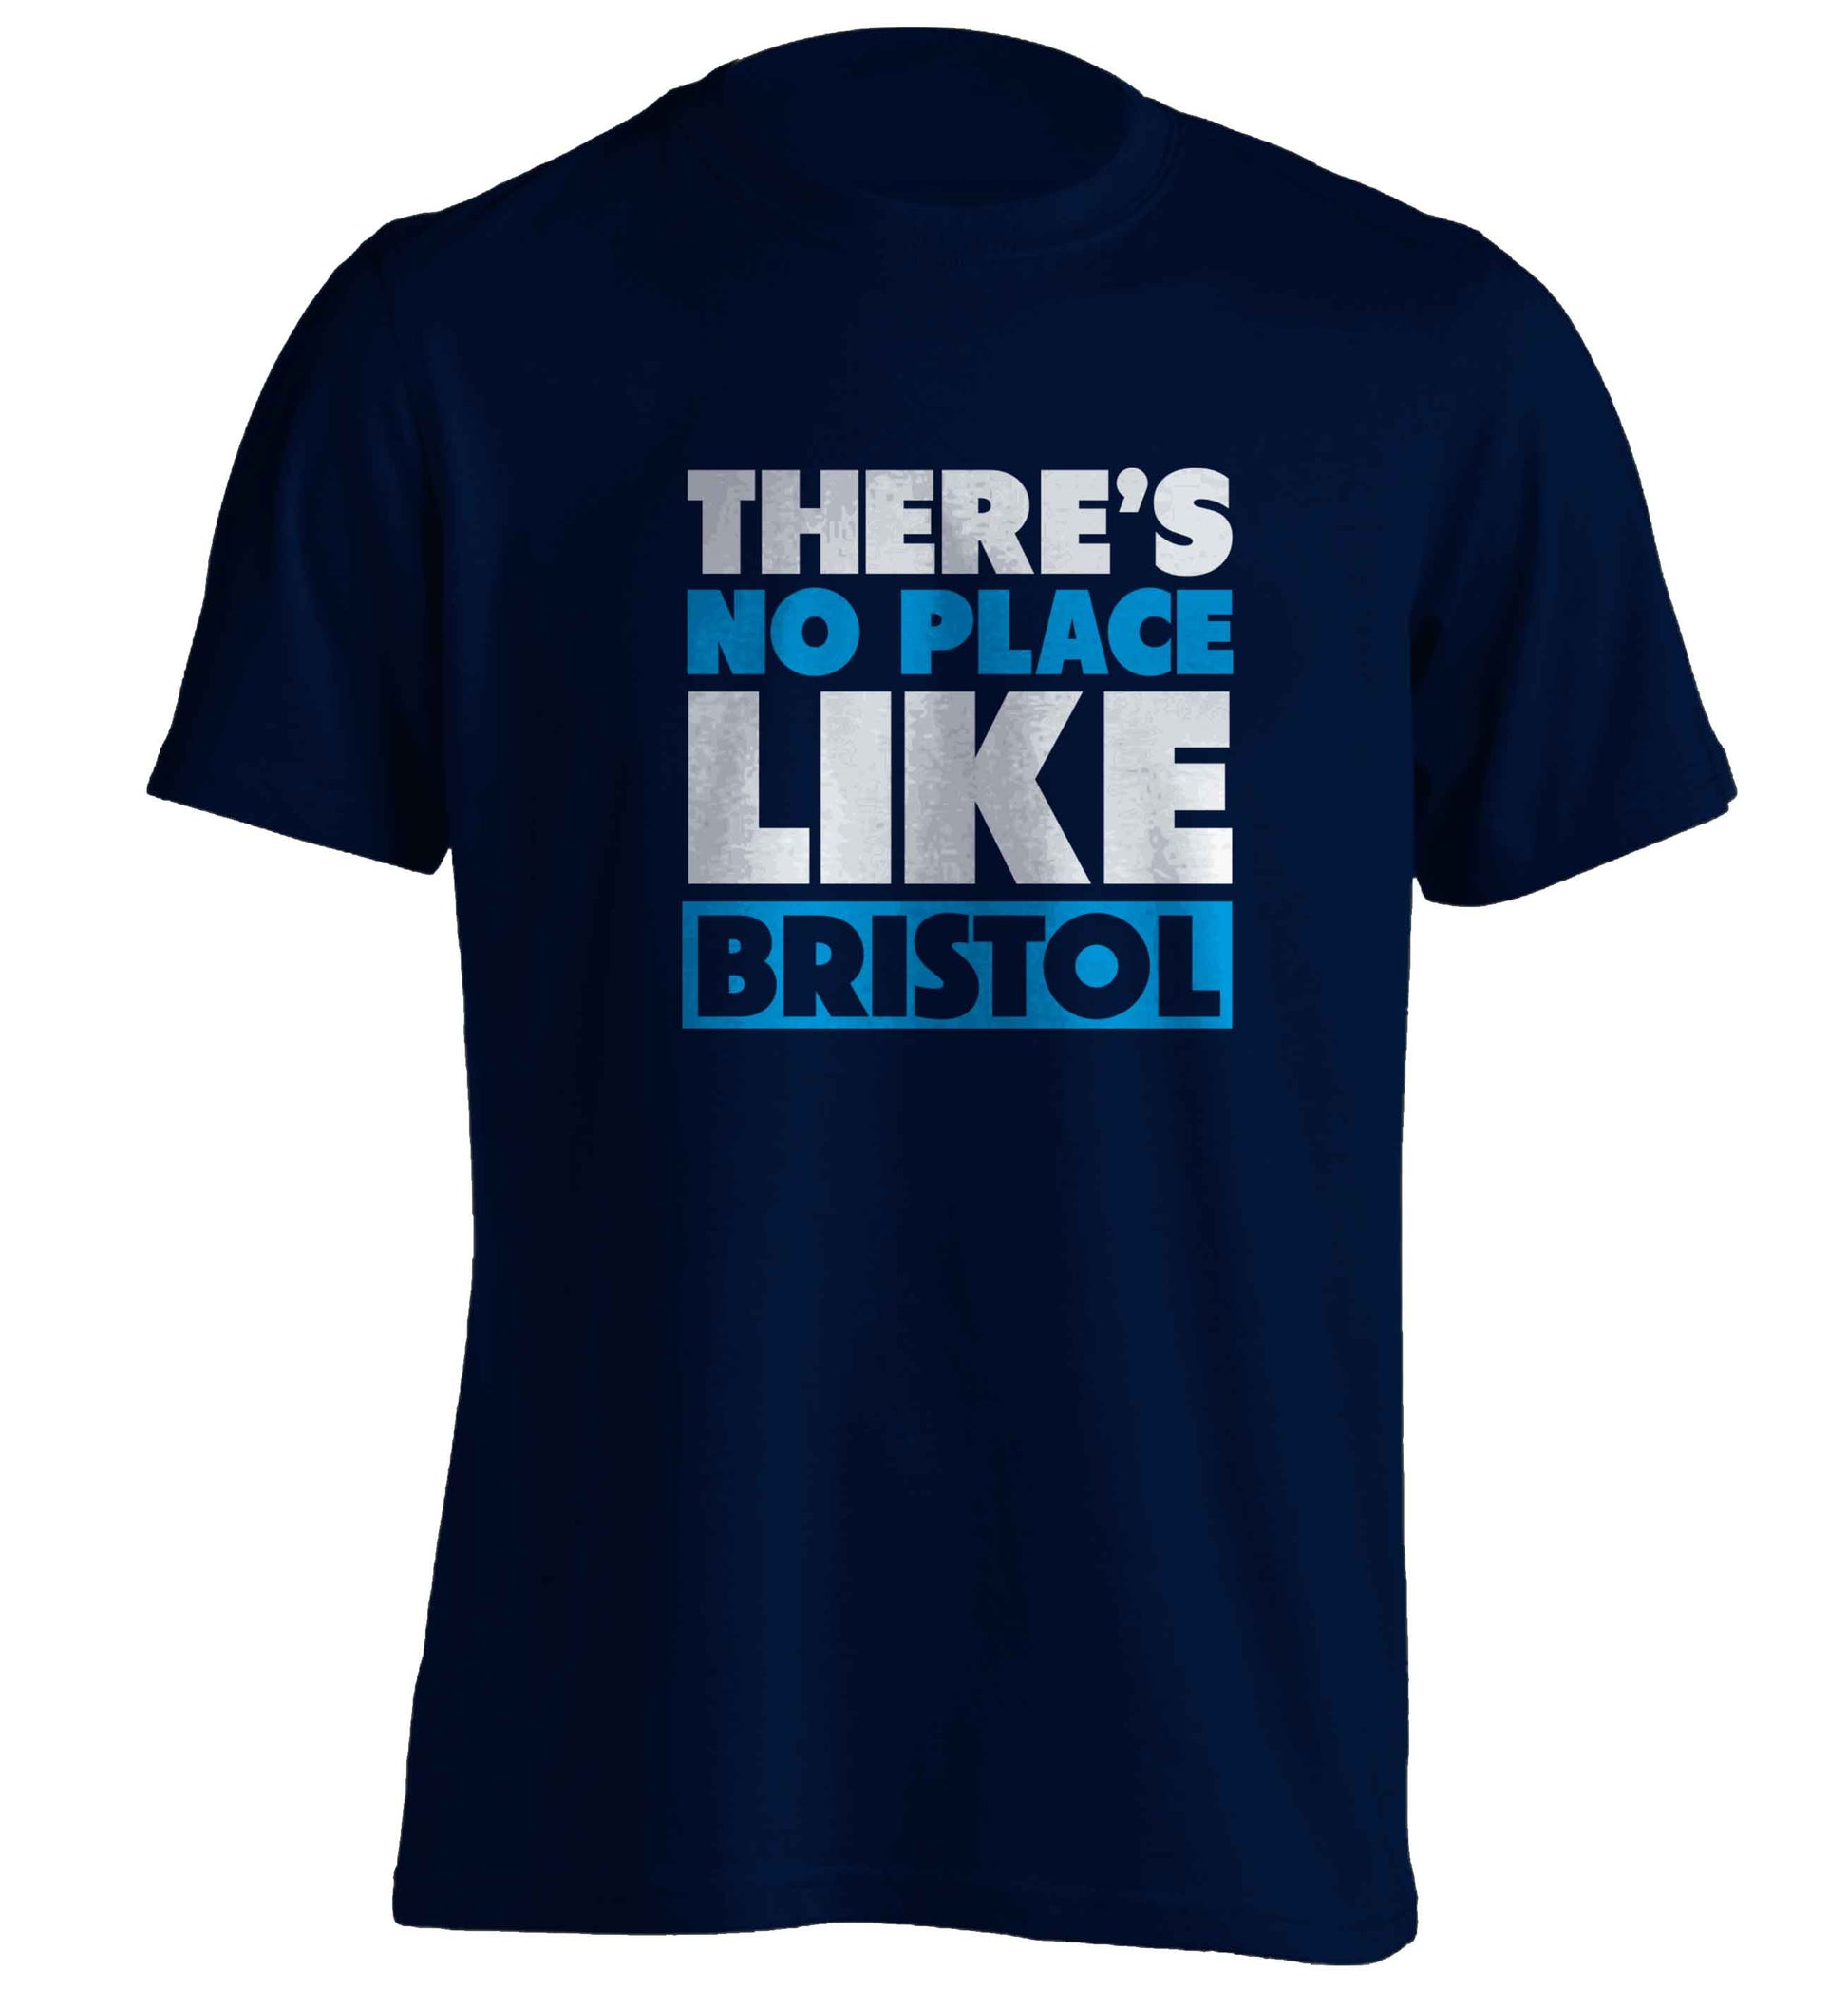 There's no place like Bristol adults unisex navy Tshirt 2XL